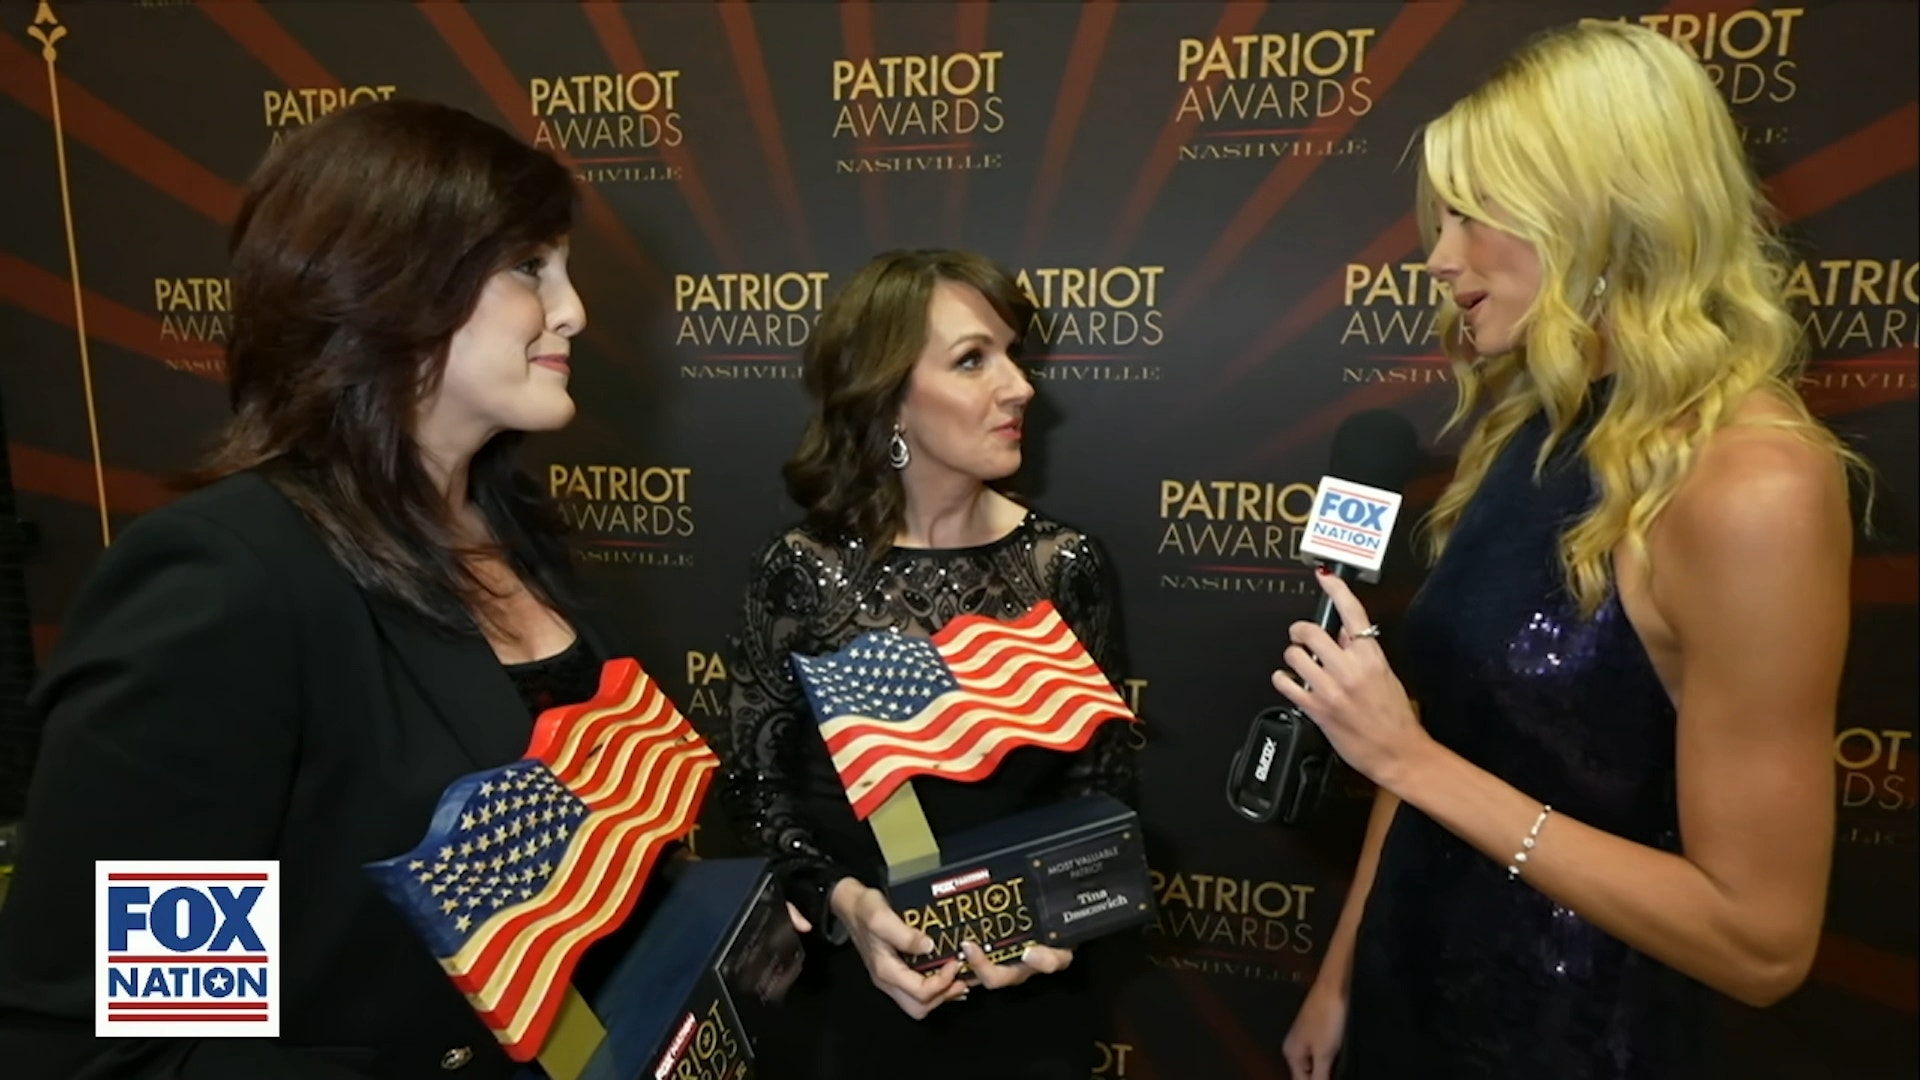 Fox Nation Patriot Awards Season 5 Episode 13 Behind The Scenes With Moms For Liberty Watch 